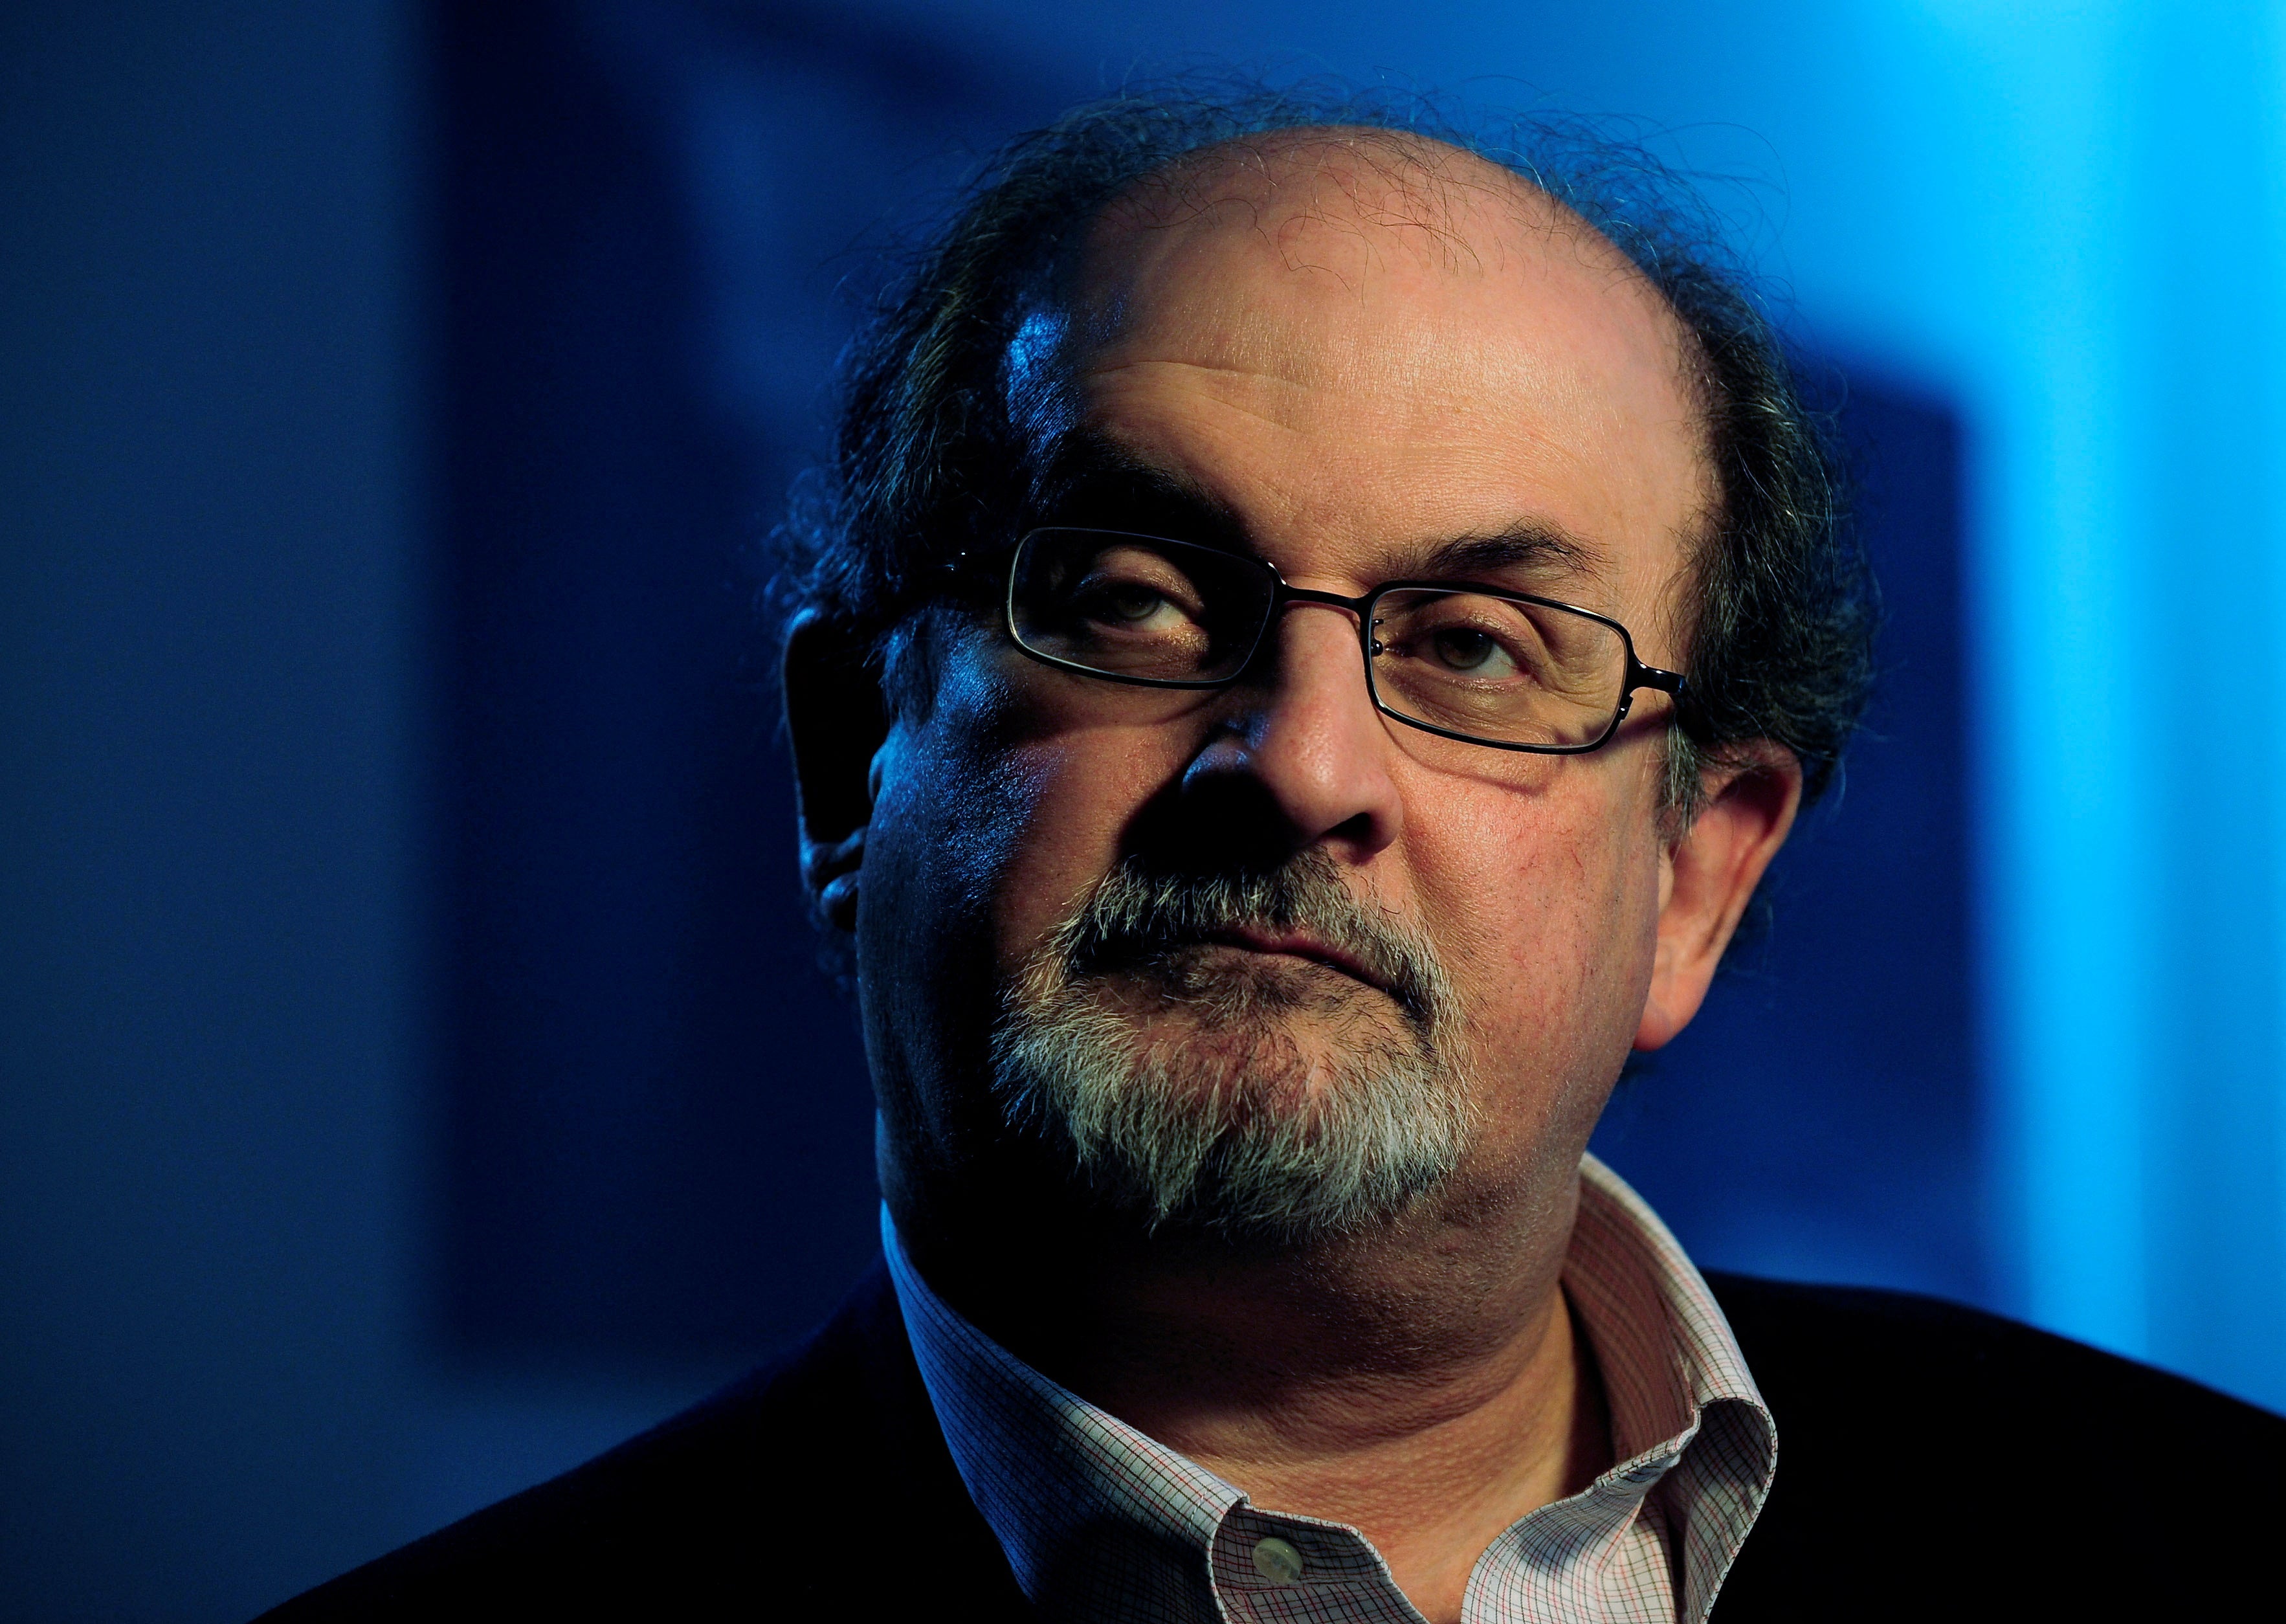 ‘While some claim that Rushdie is an apostate, for which the punishment is death, there is no such punishment for apostasy prescribed in the Holy Quran’